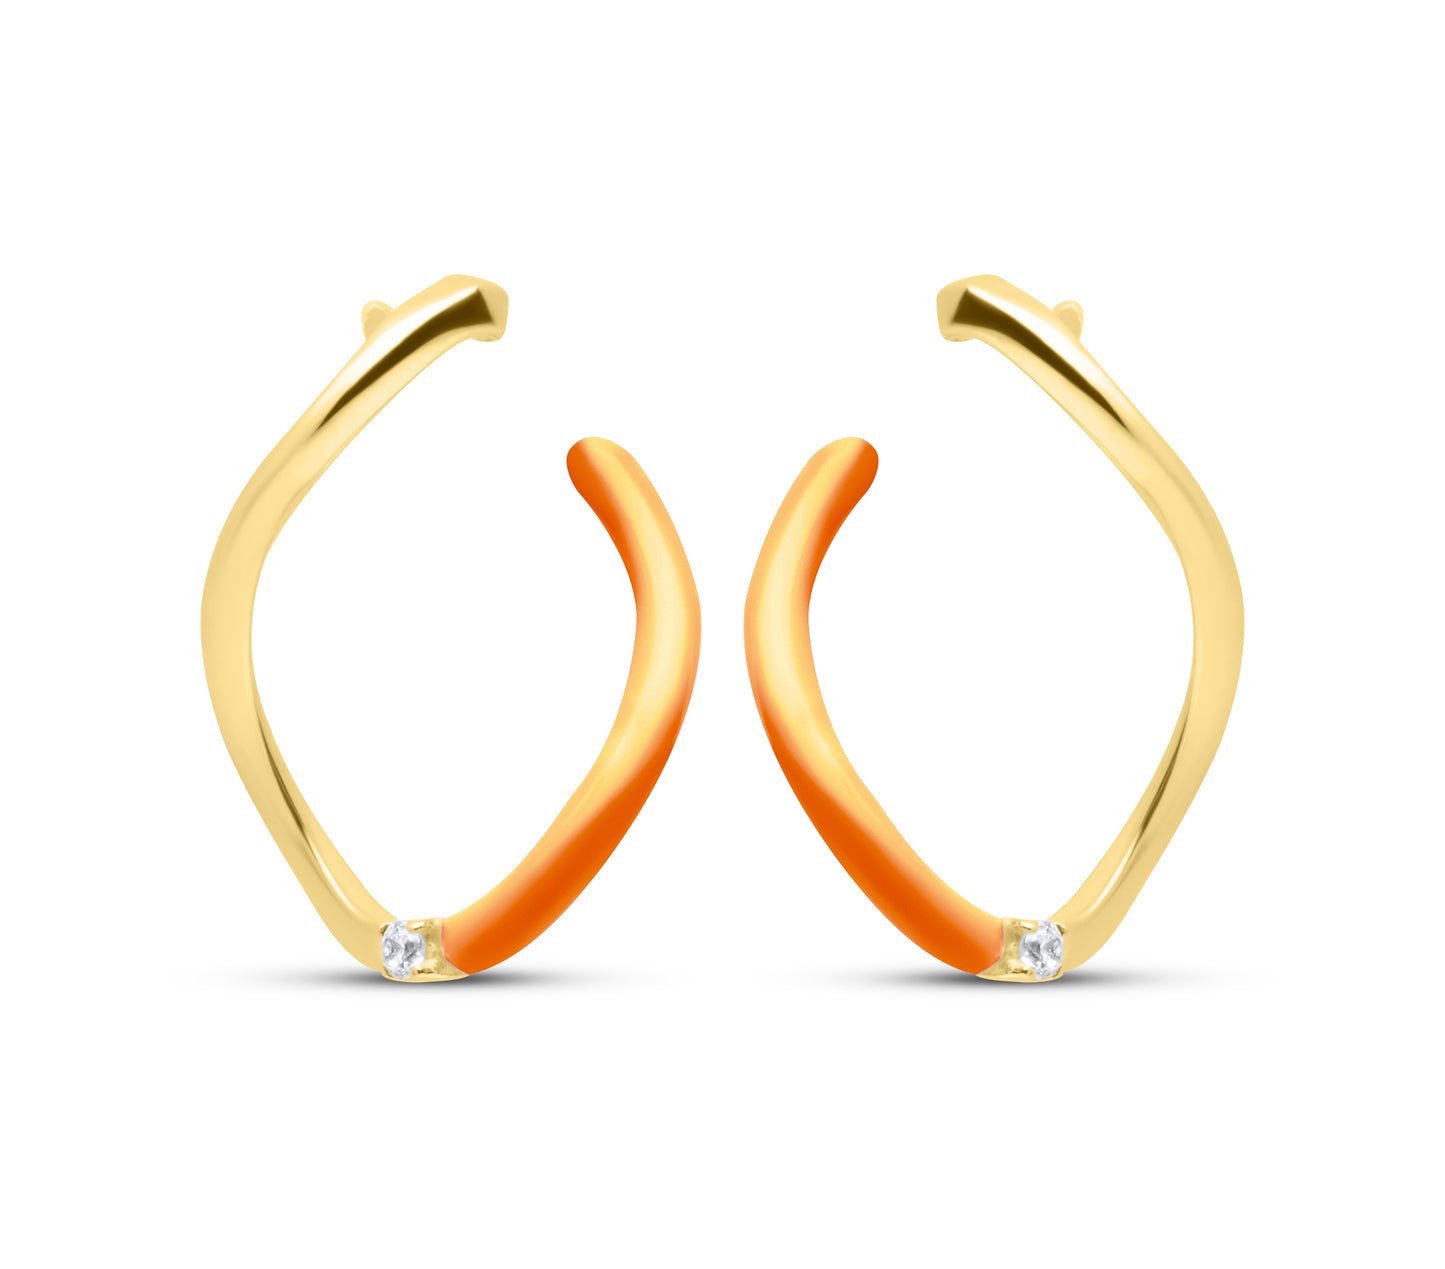 Coral Wave Pair Earrings - Gold Plated